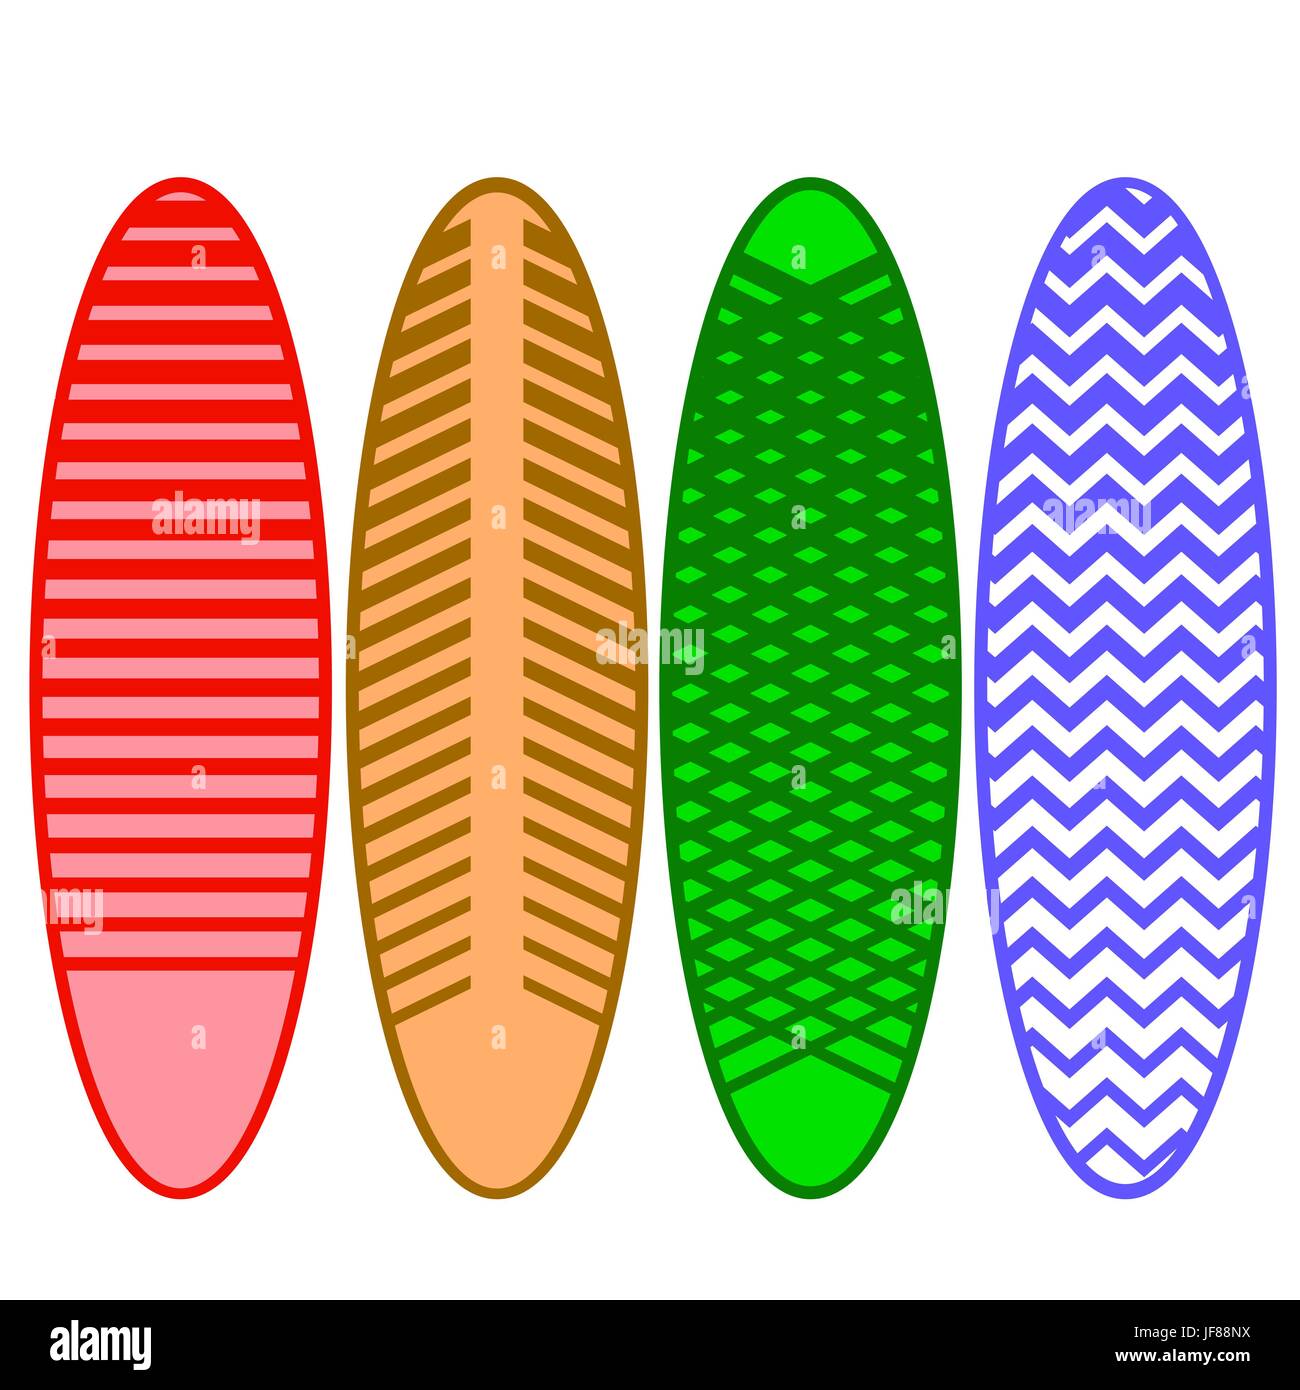 Set of Surfboards Isolated on White Background Stock Vector